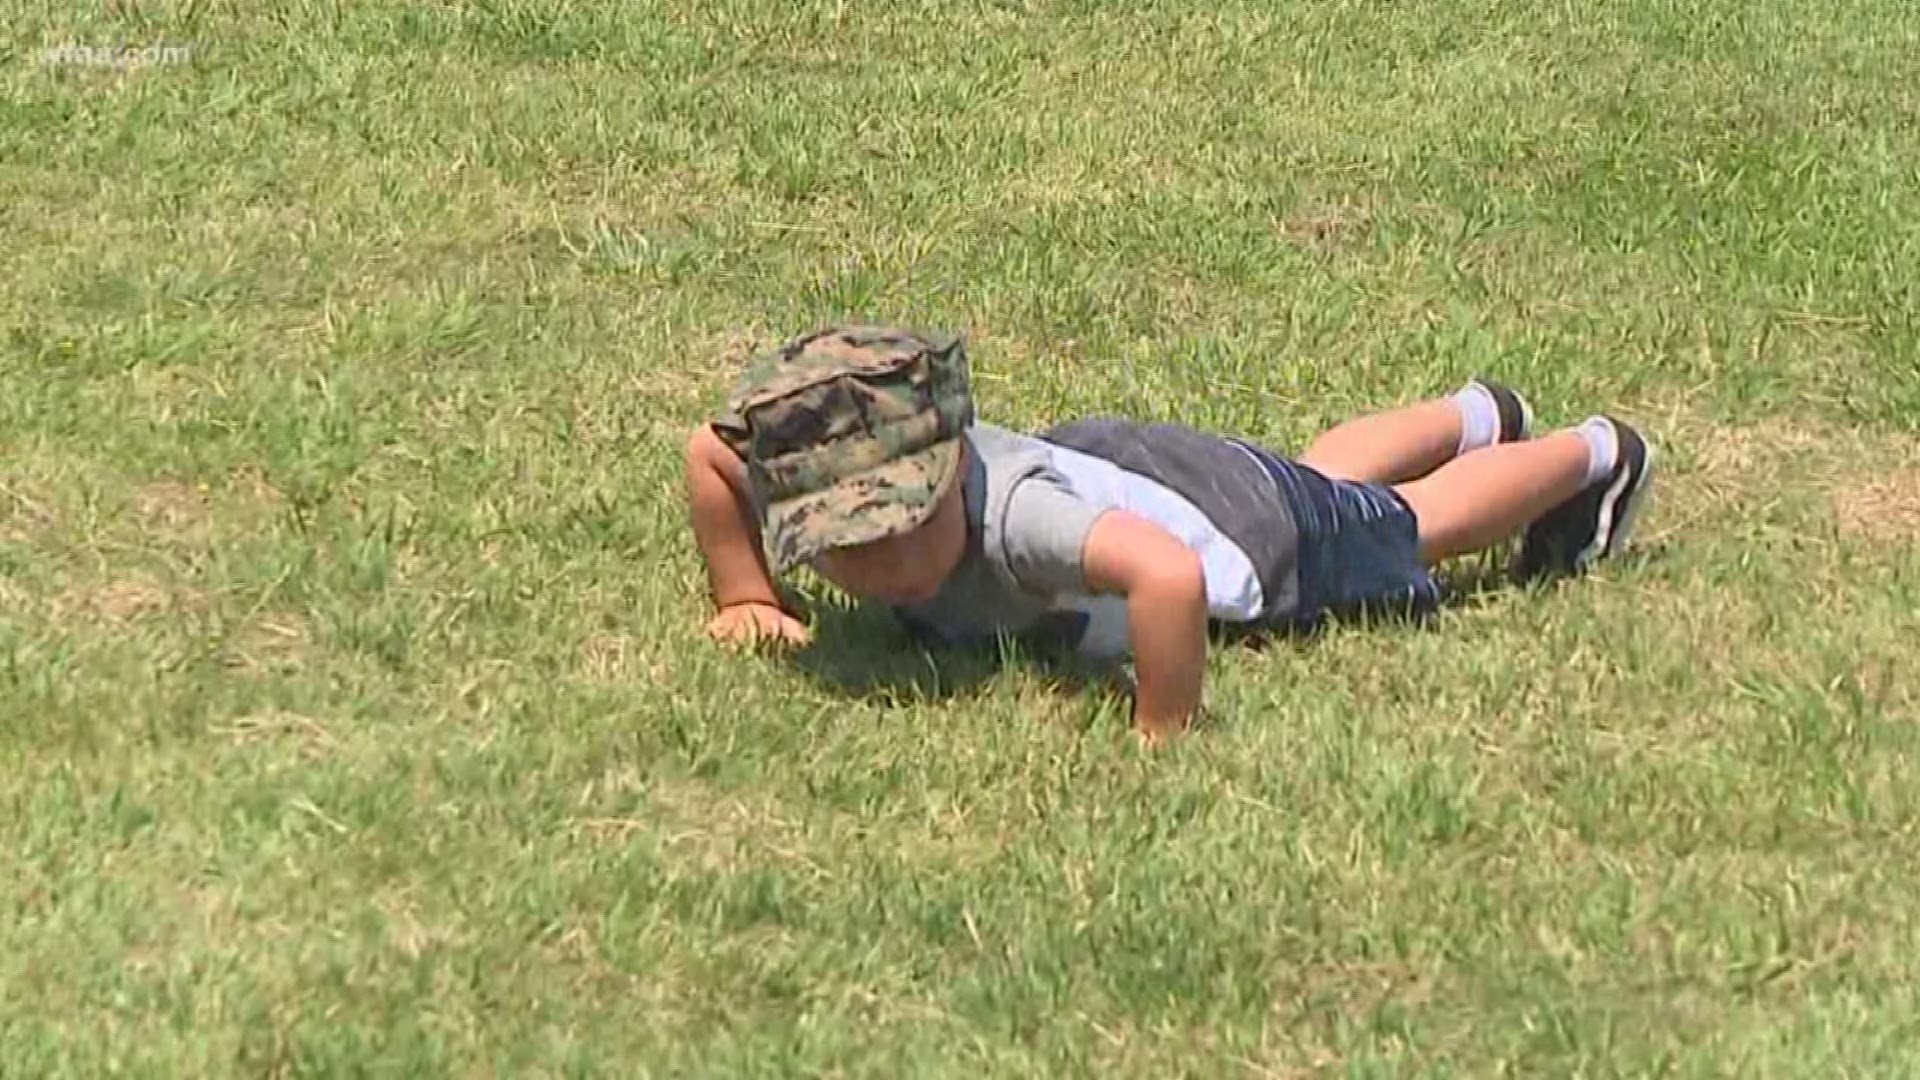 Big-hearted North Texas boy honors Marines for his birthday